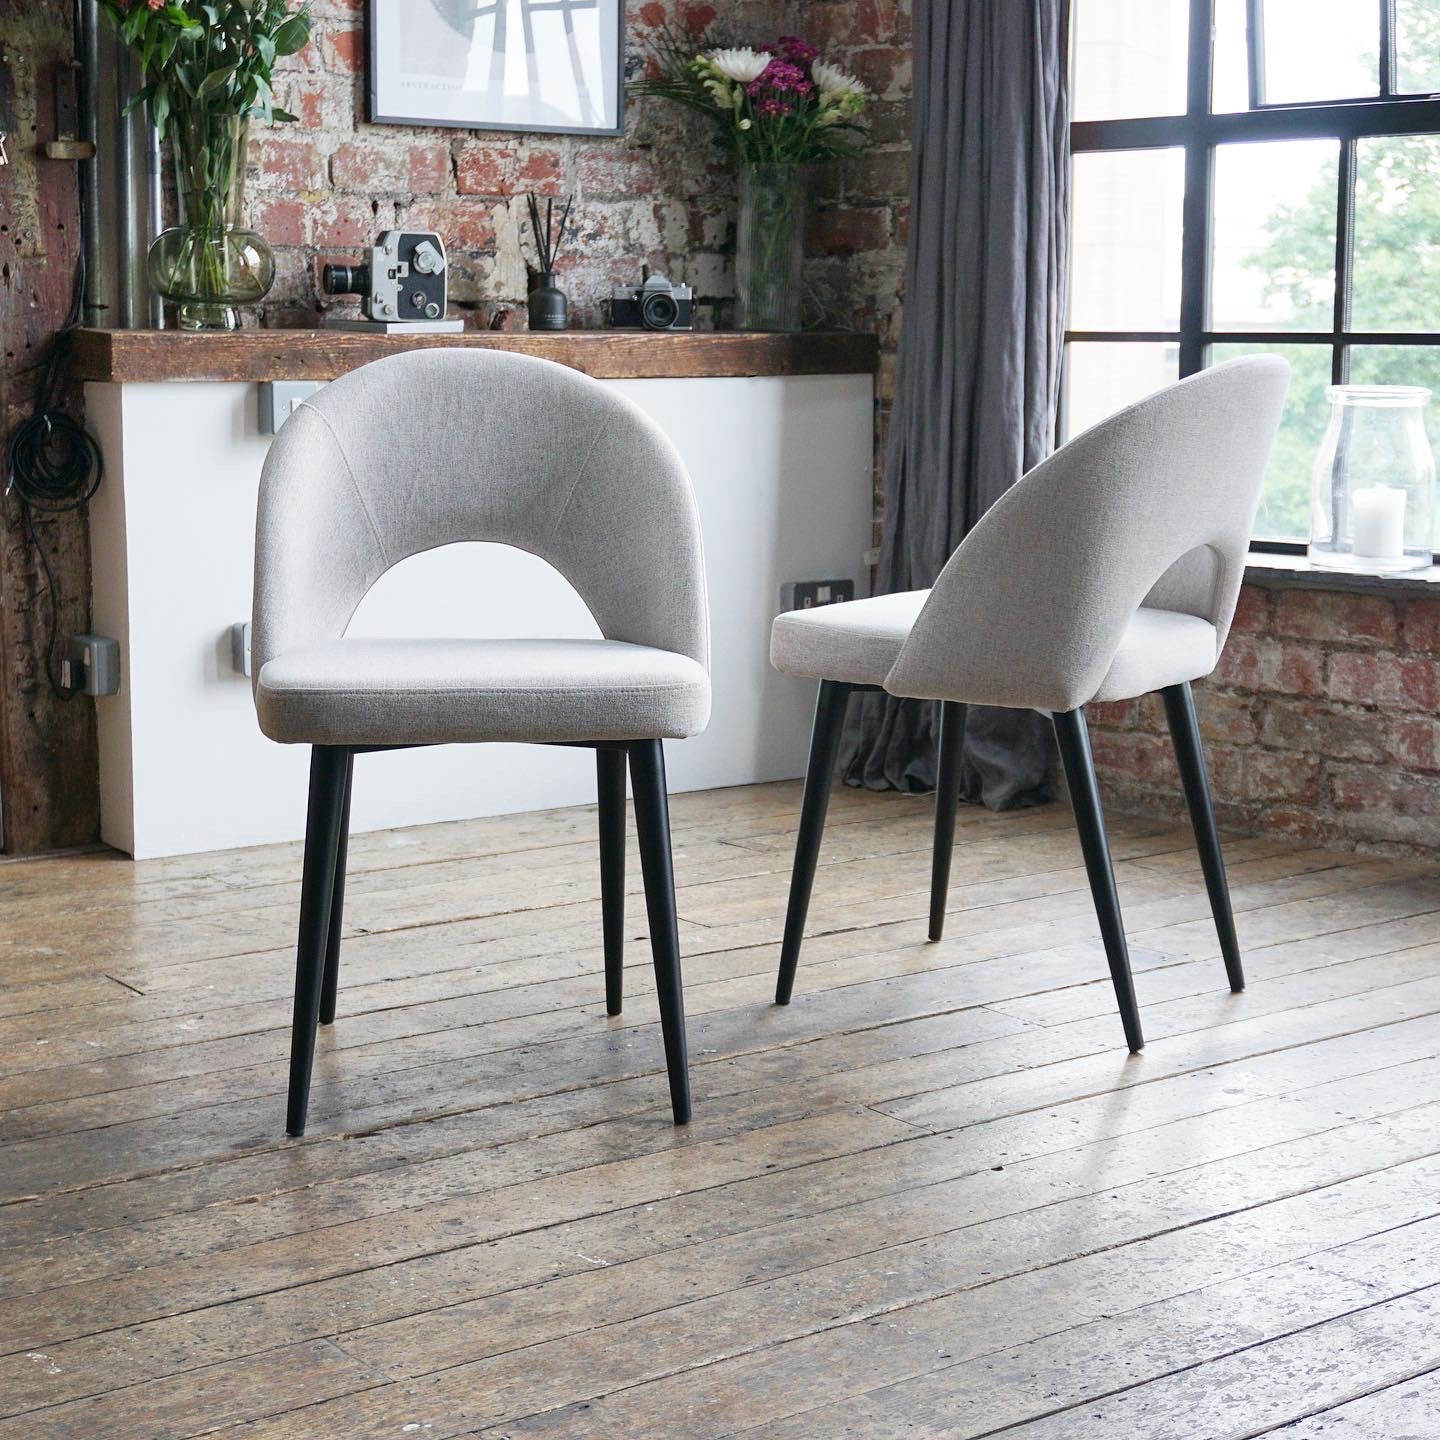 Bella Dining Chairs in Stone (2pk)